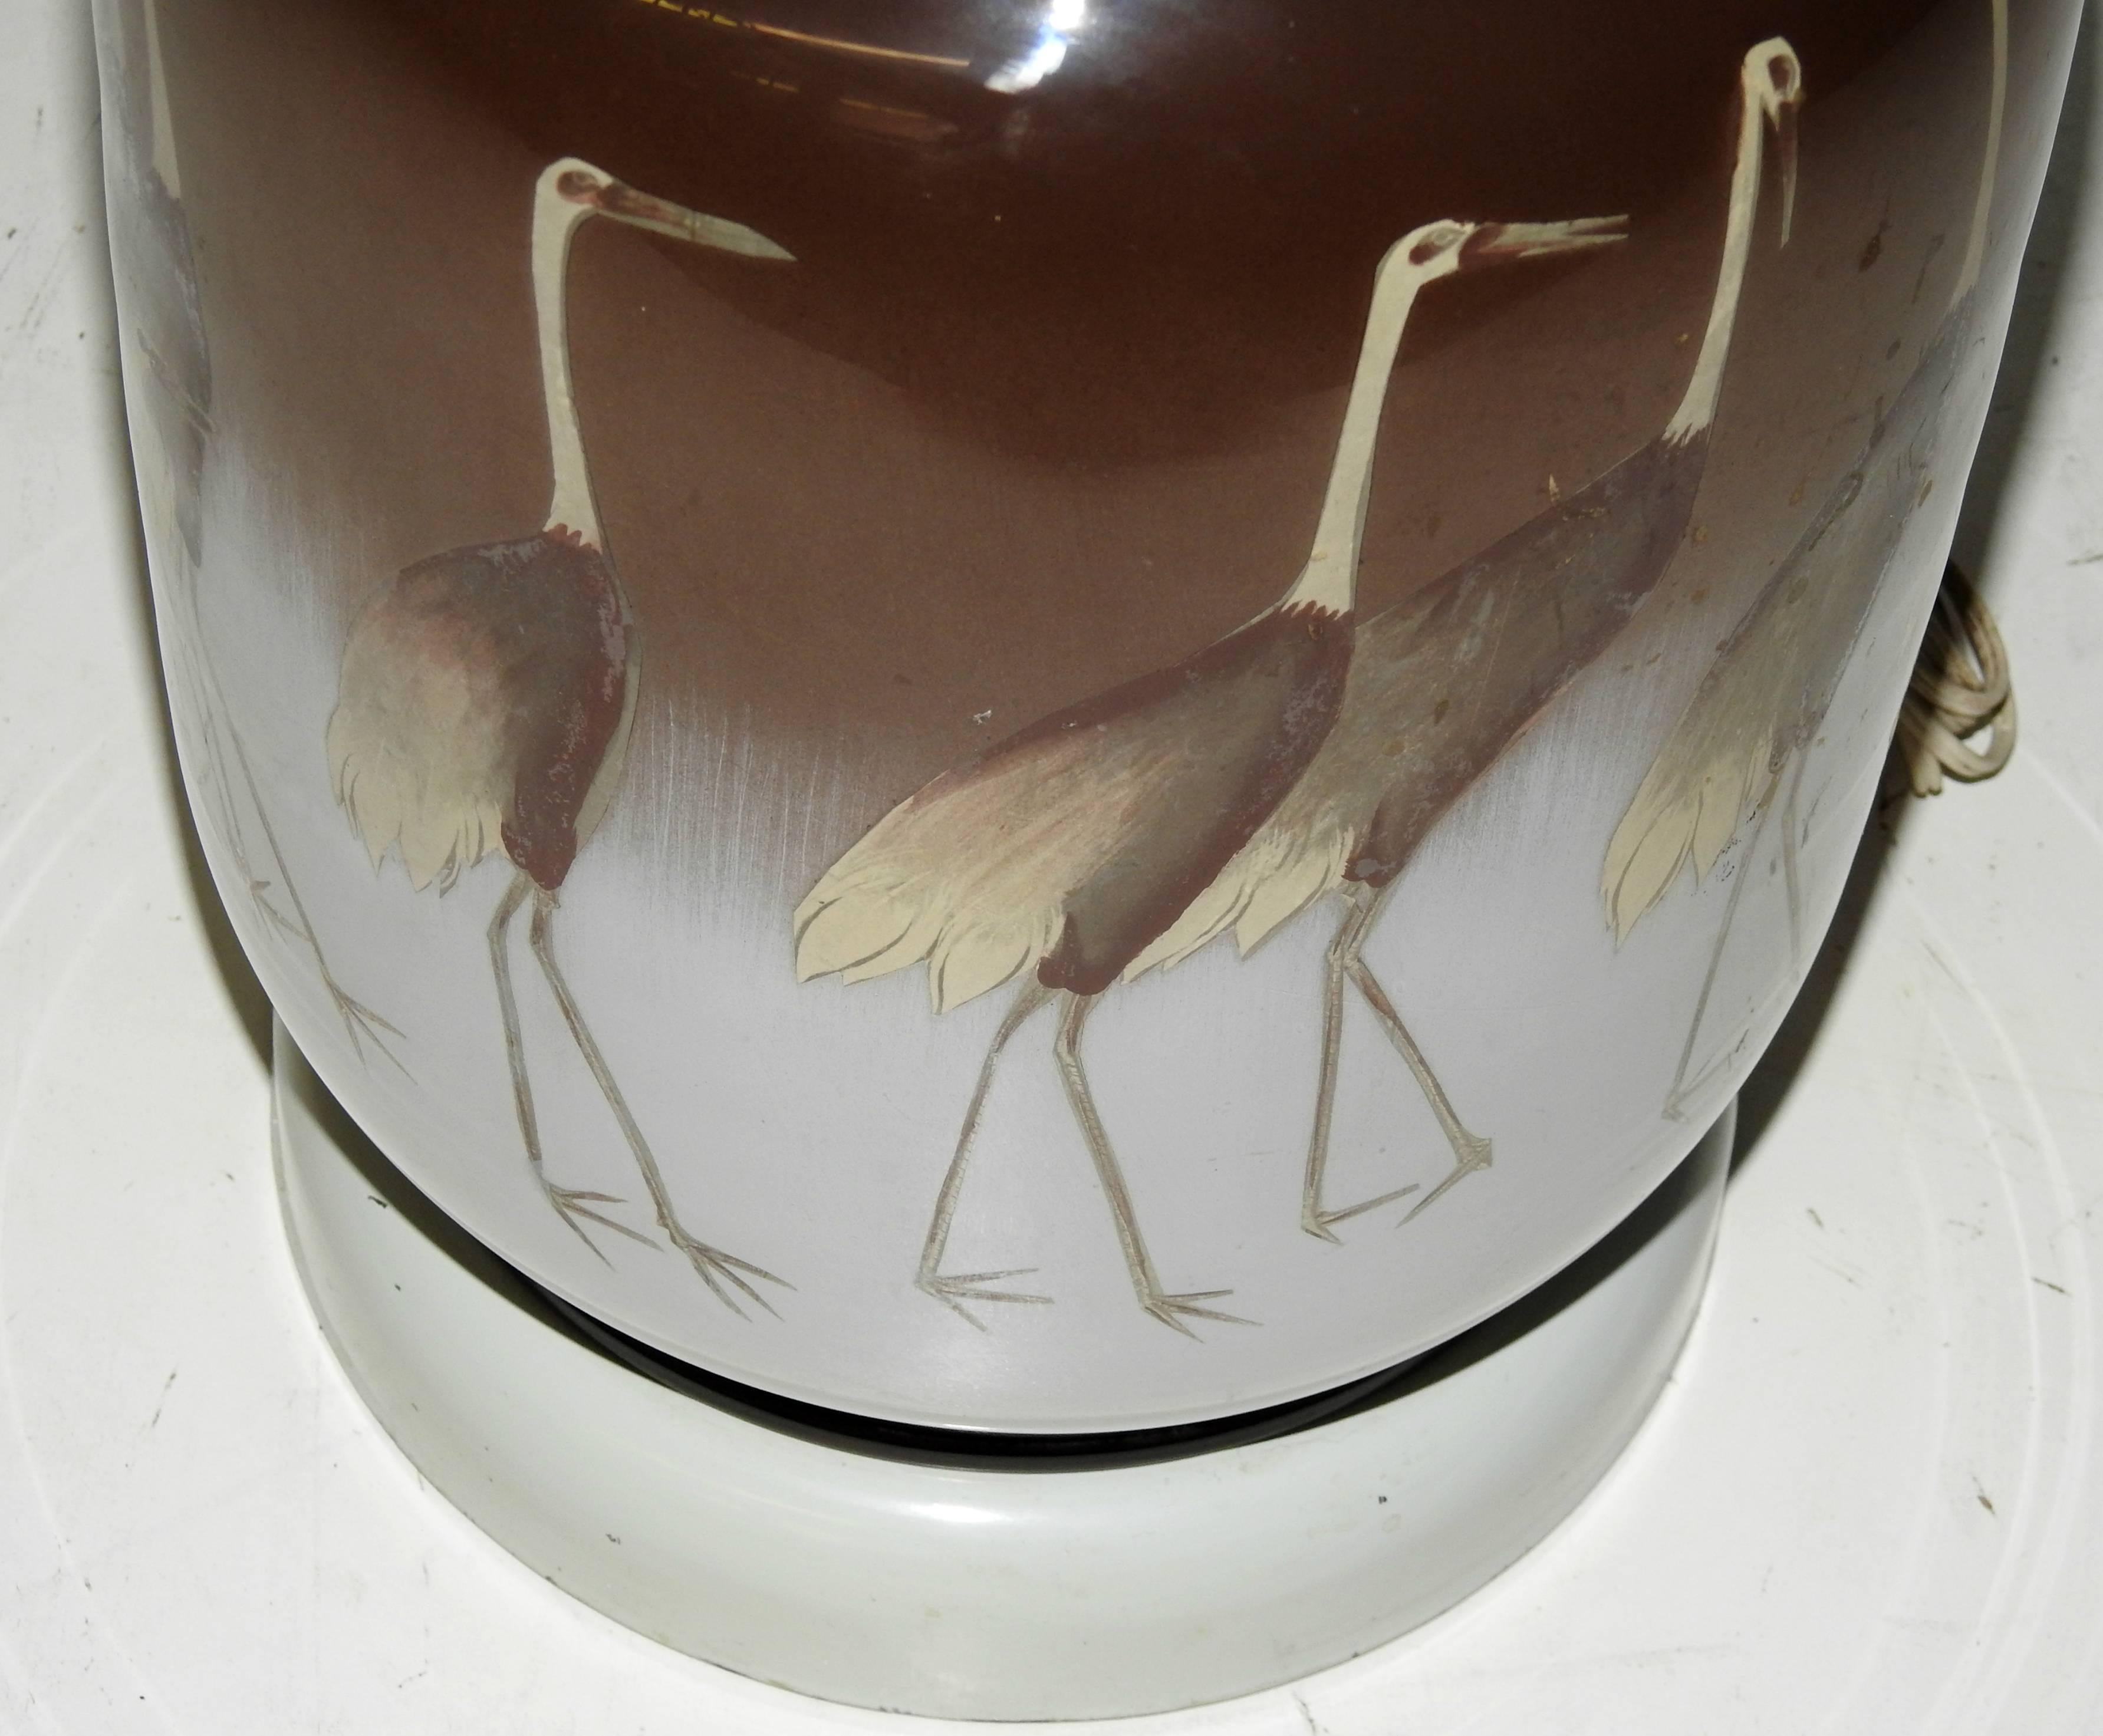 Mid-Century Modern reverse painted glass lamp with multiple herons.